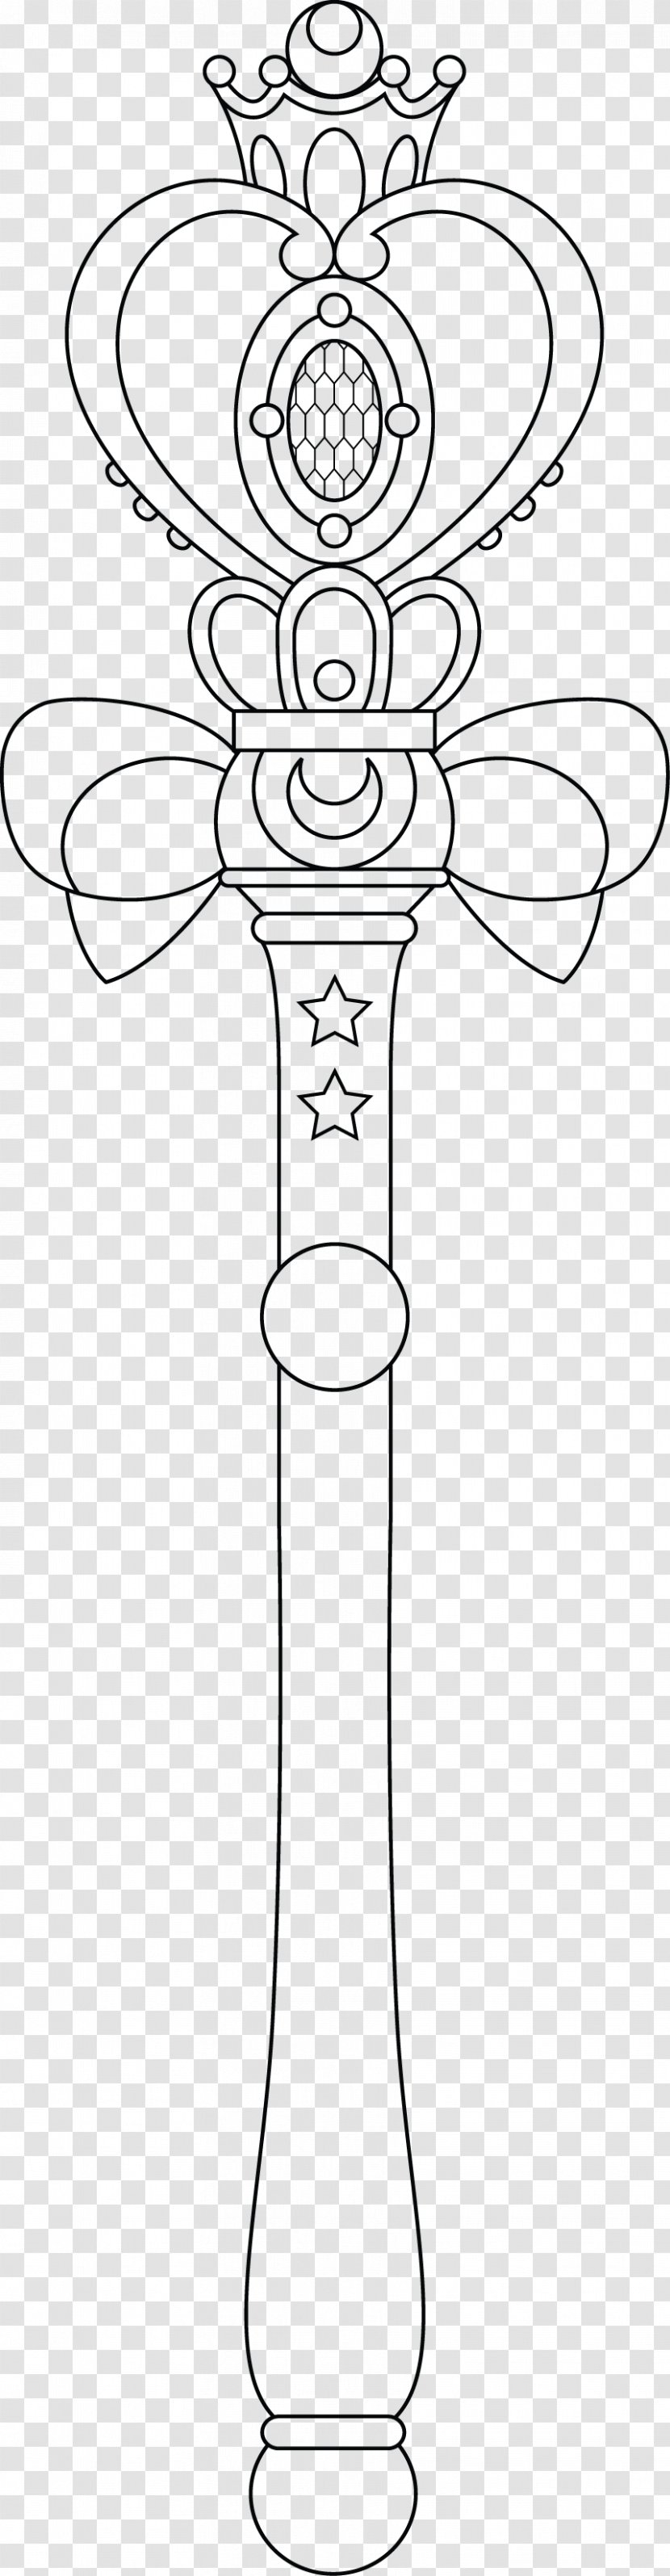 Sailor Moon Coloring Book Wand Drawing Line Art - S The Movie Transparent PNG